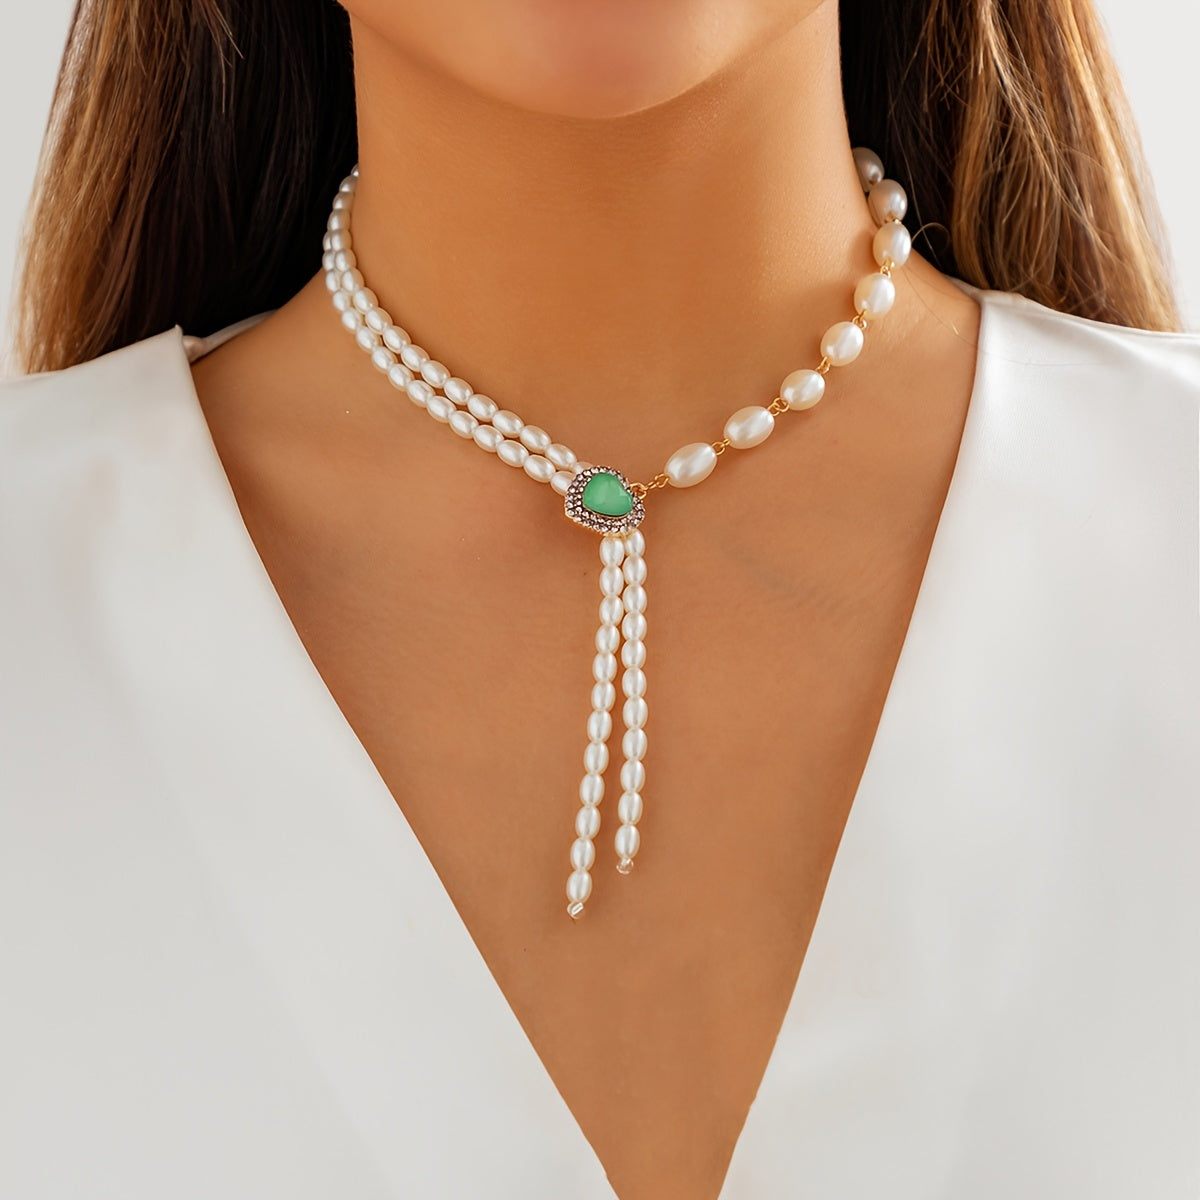 Gorgeous Heart-Shaped Rhinestone & Pearl Necklace - Perfect for the Elegant & Temperamented!